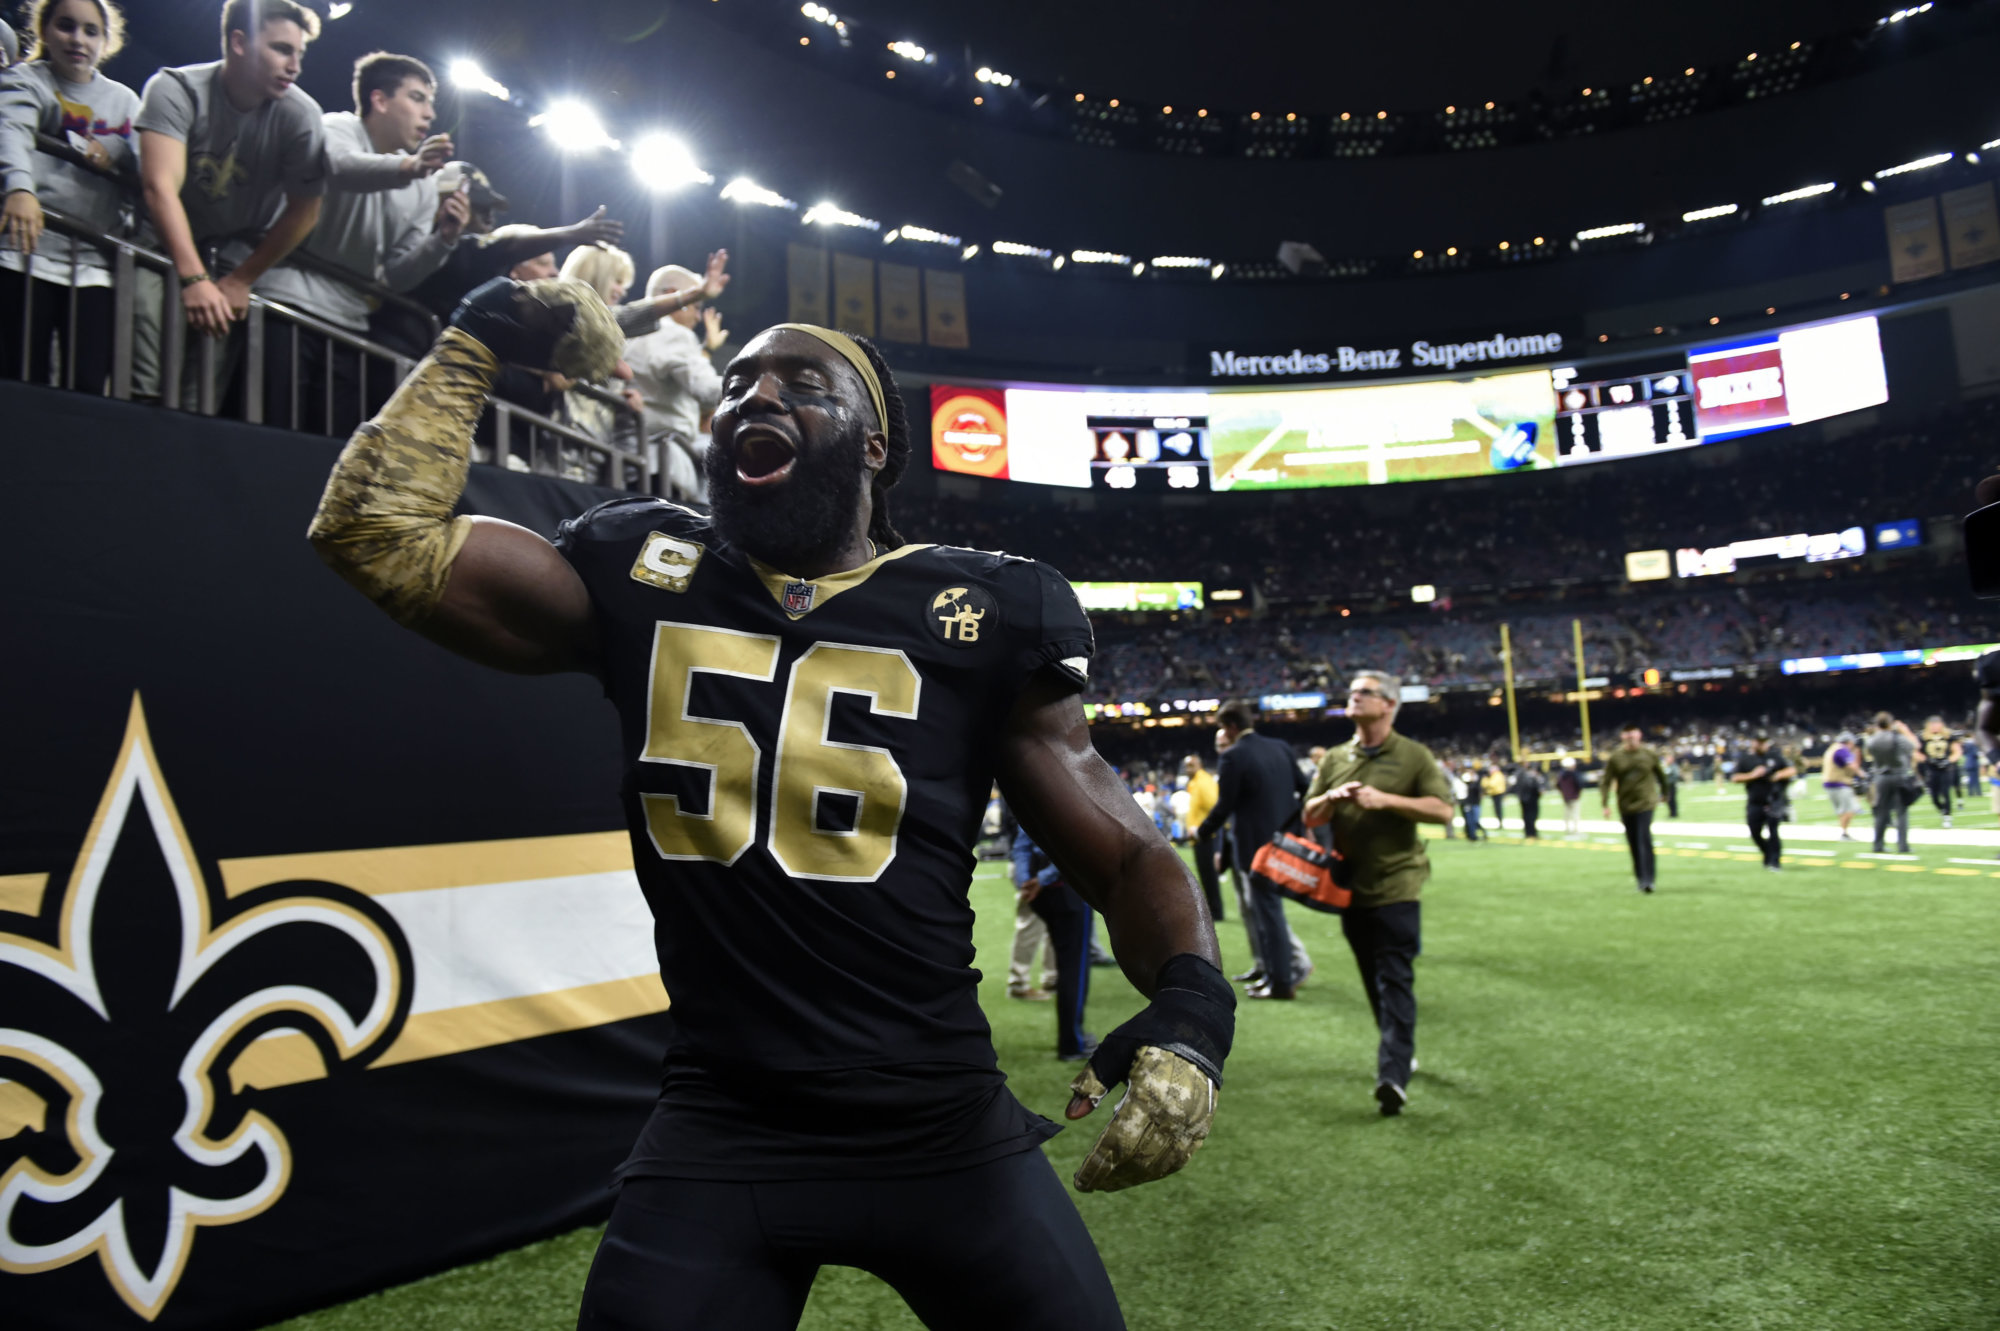 New Orleans Saints outside linebacker Demario Davis (56) celebrates after defeating the Los Angeles Rams in an NFL football game in New Orleans, Sunday, Nov. 4, 2018. The Saints won 45-35. (AP Photo/Bill Feig)